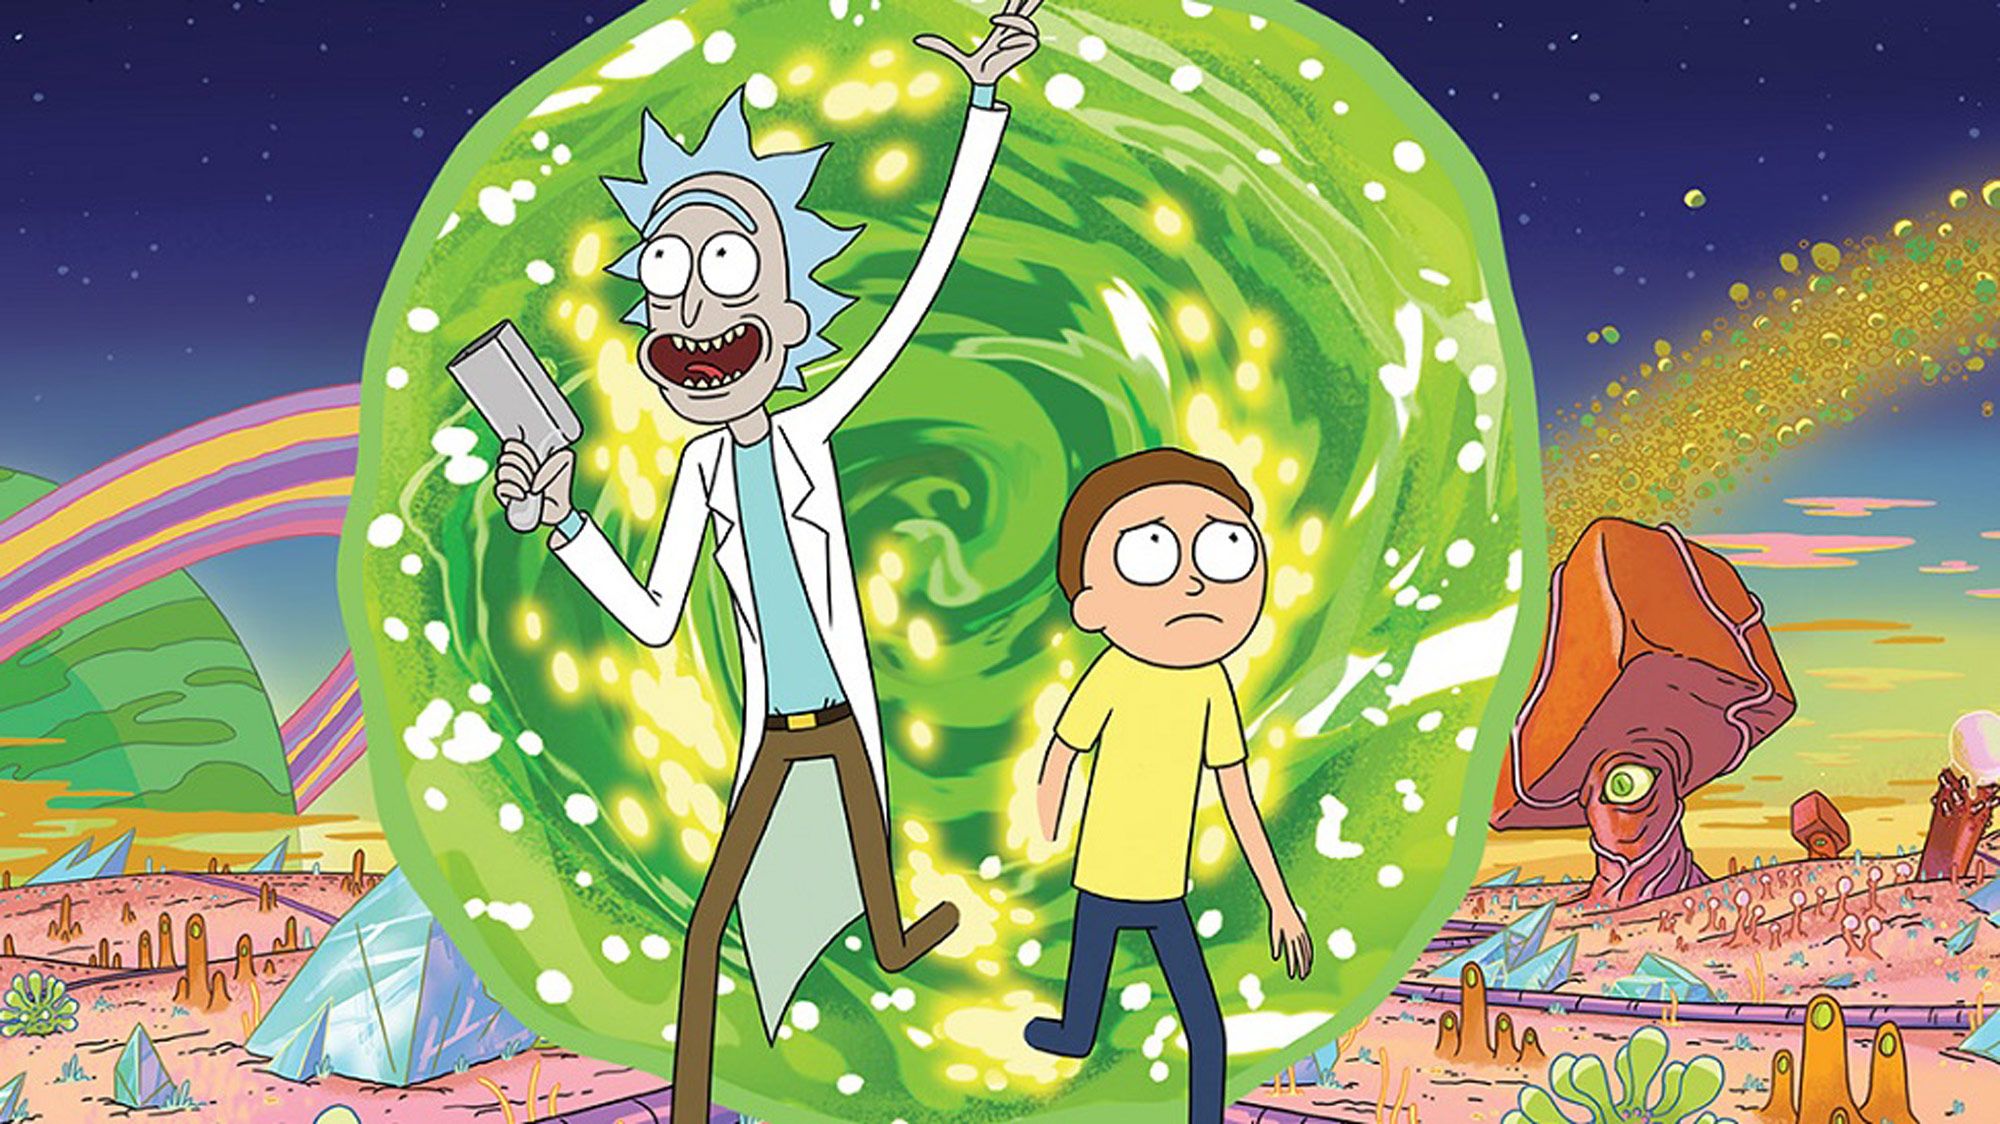 Rick and Morty drops suitably bizarre new teaser video ahead of